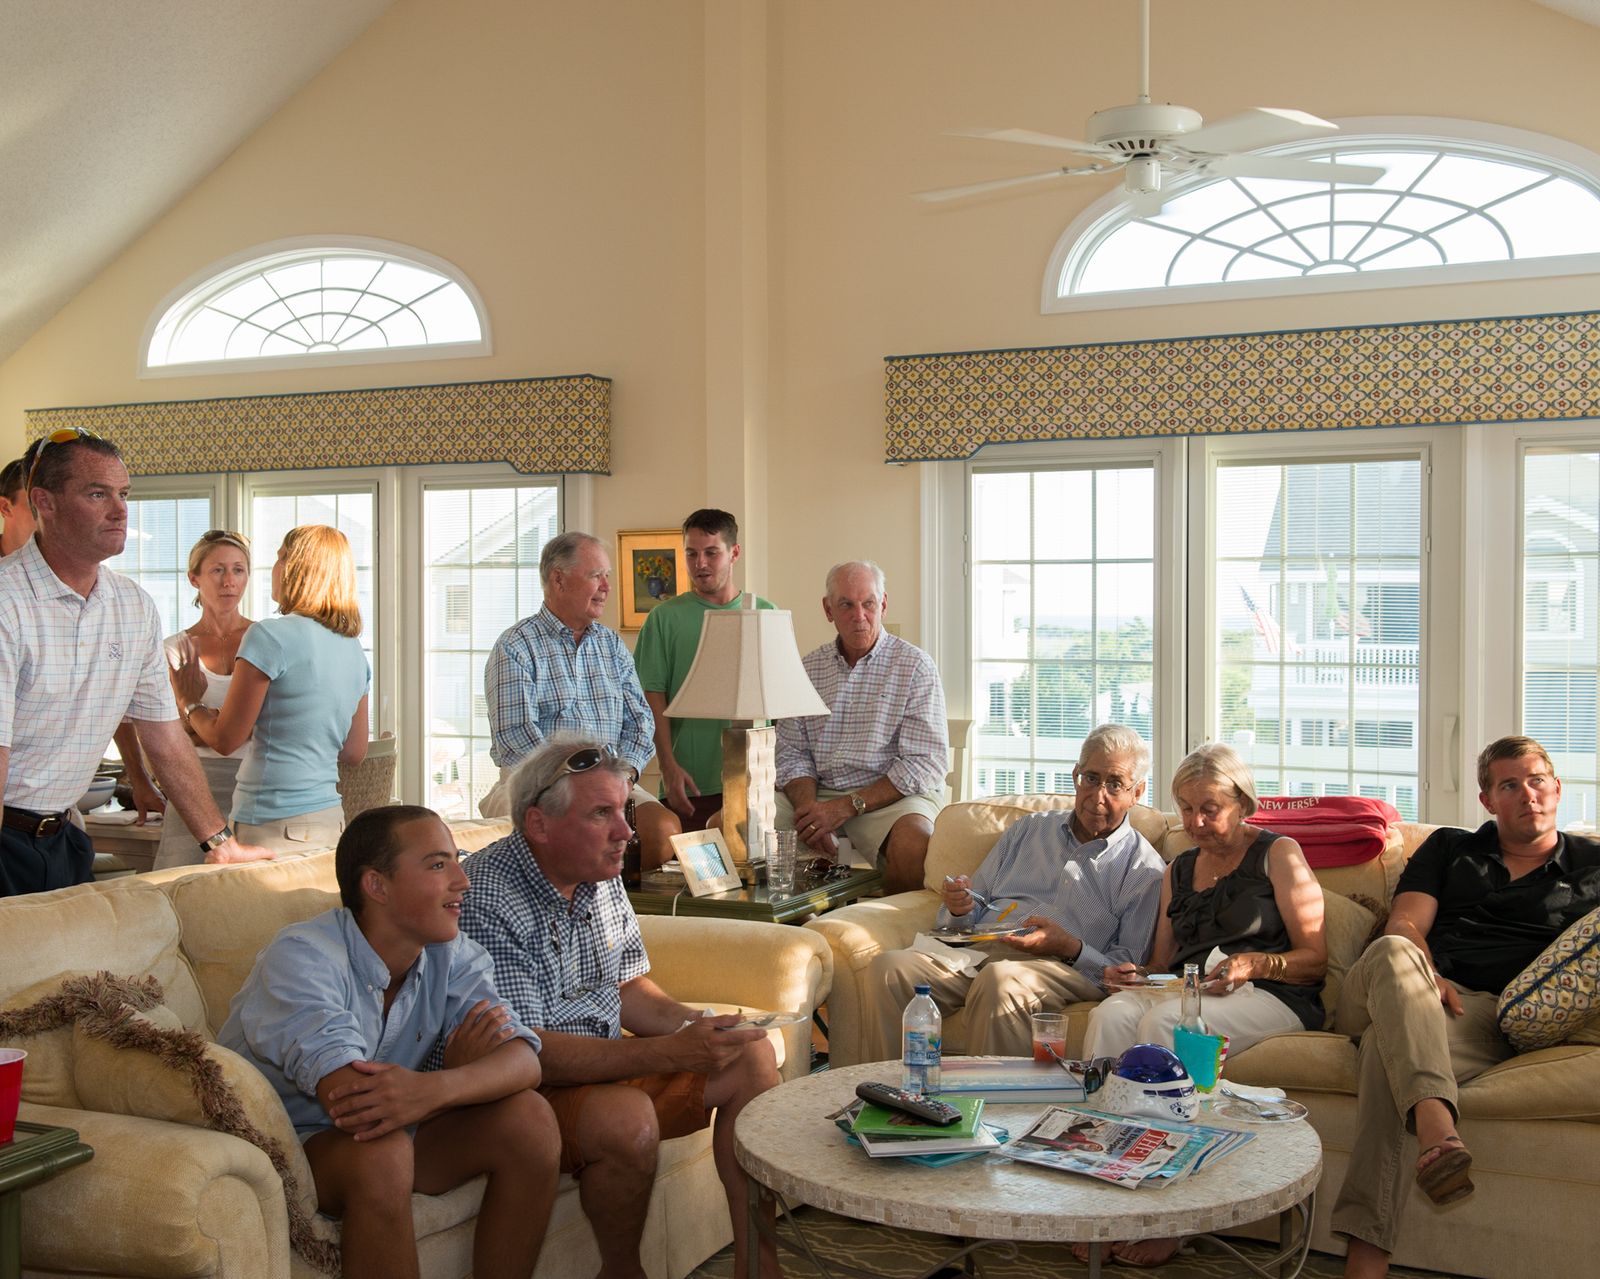 © Martin Toft - The Heenans, Stone Harbor, New Jersey, United States, 10 Aug 2014